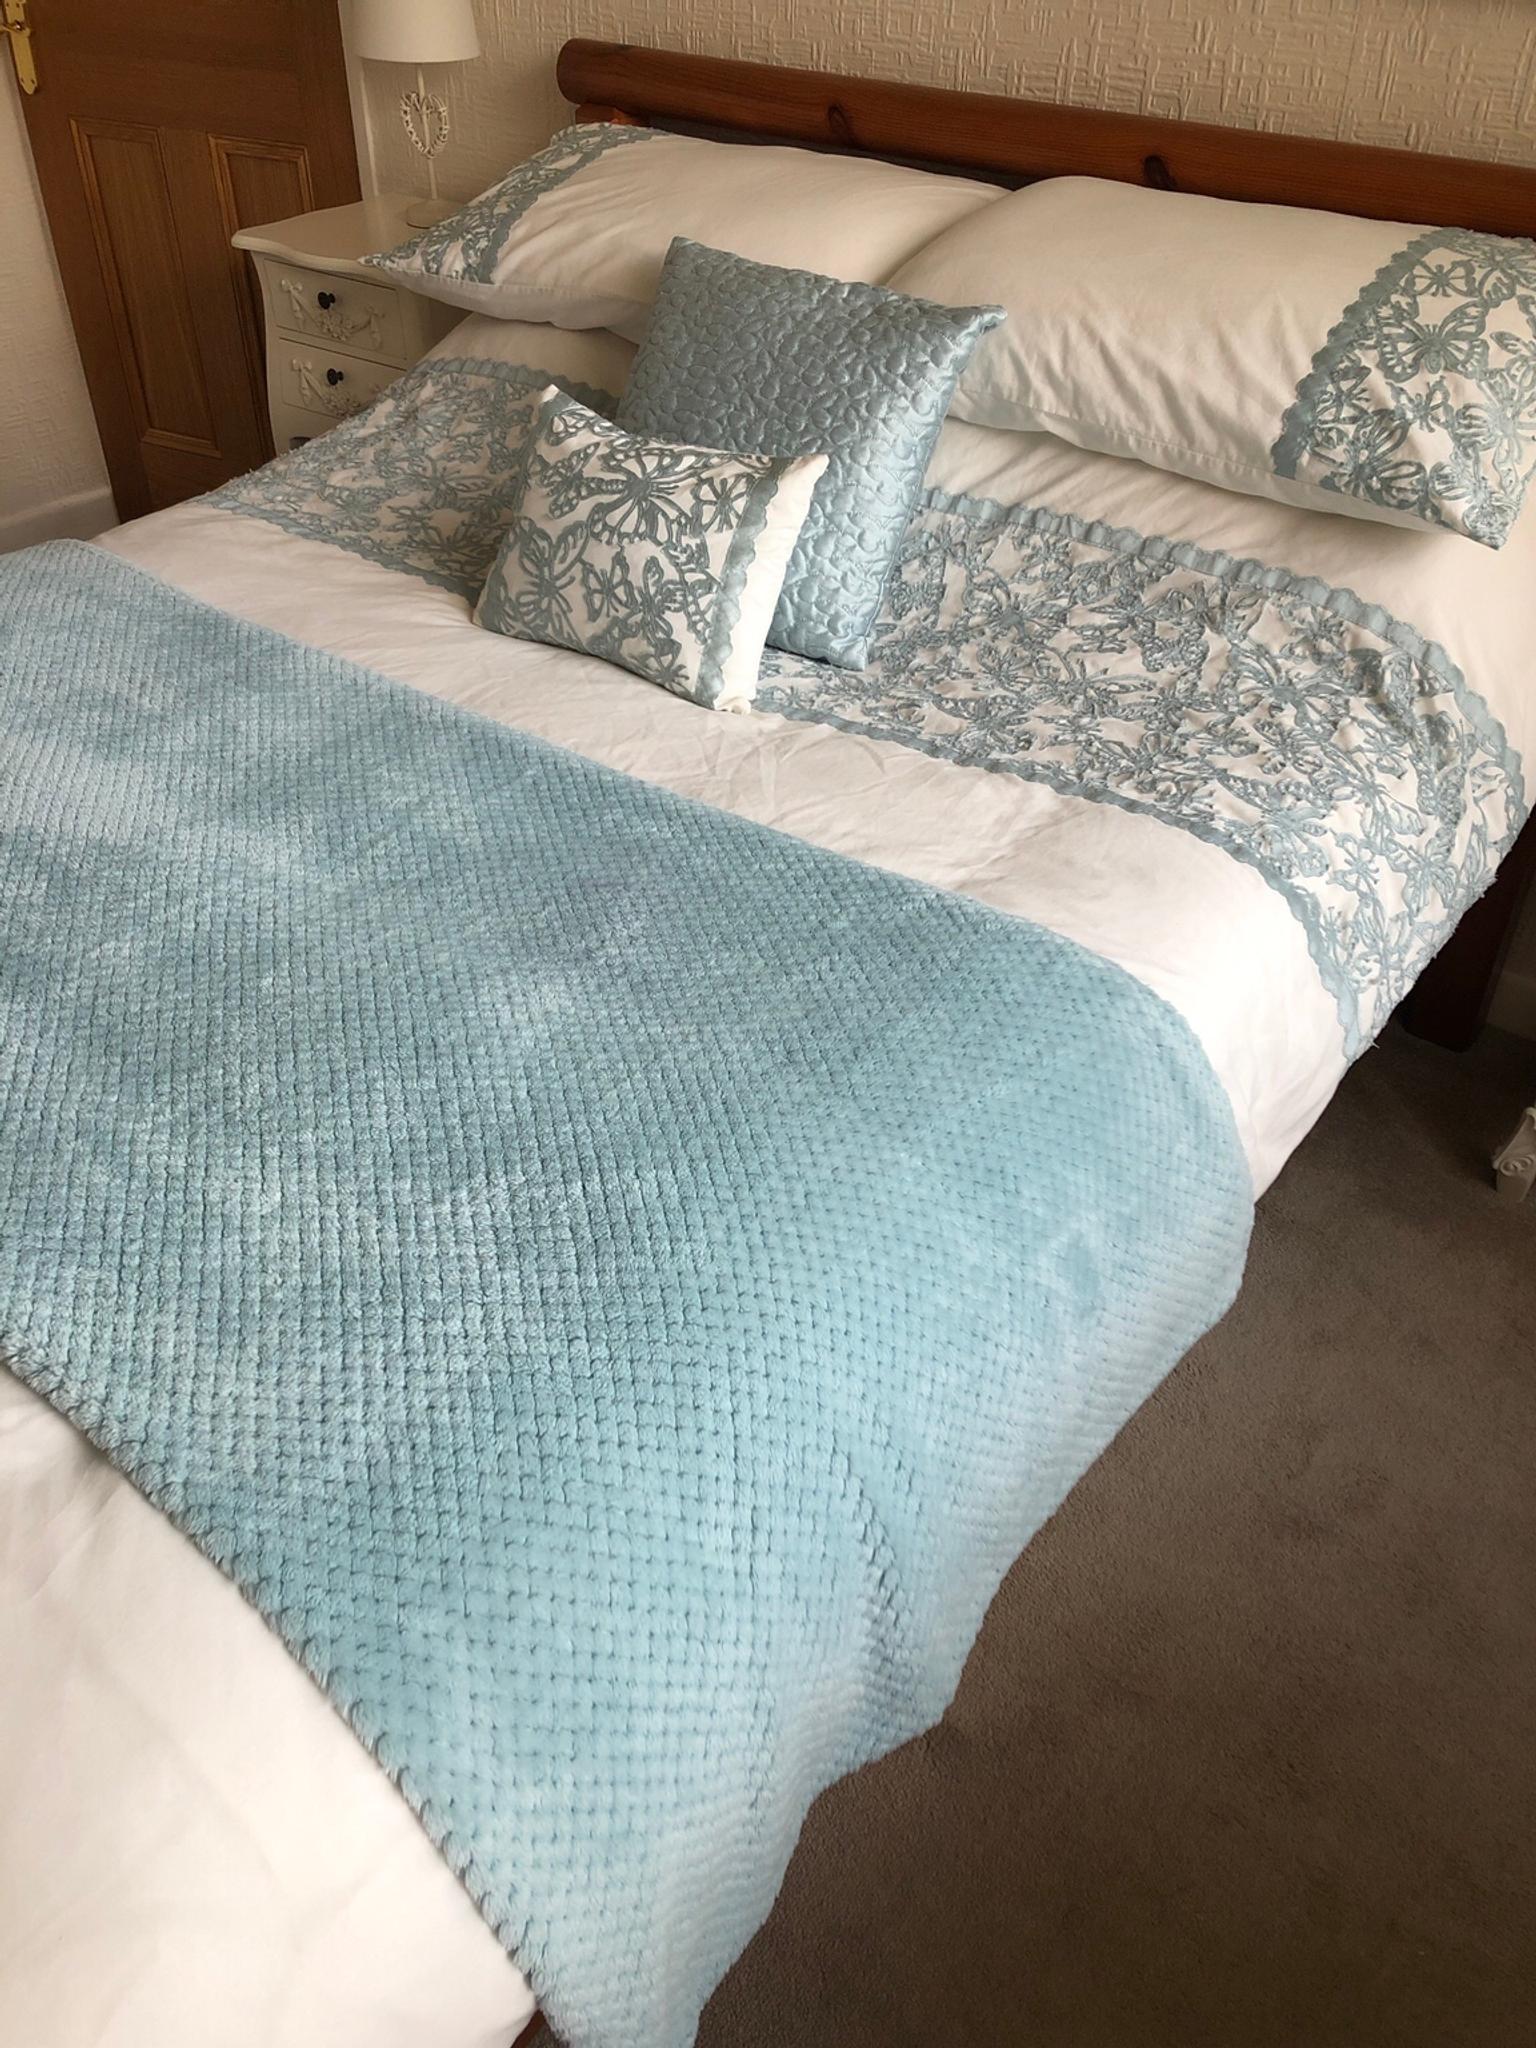 Double Duvet Set With Cushions And Throw In Walmersley Fur 30 00